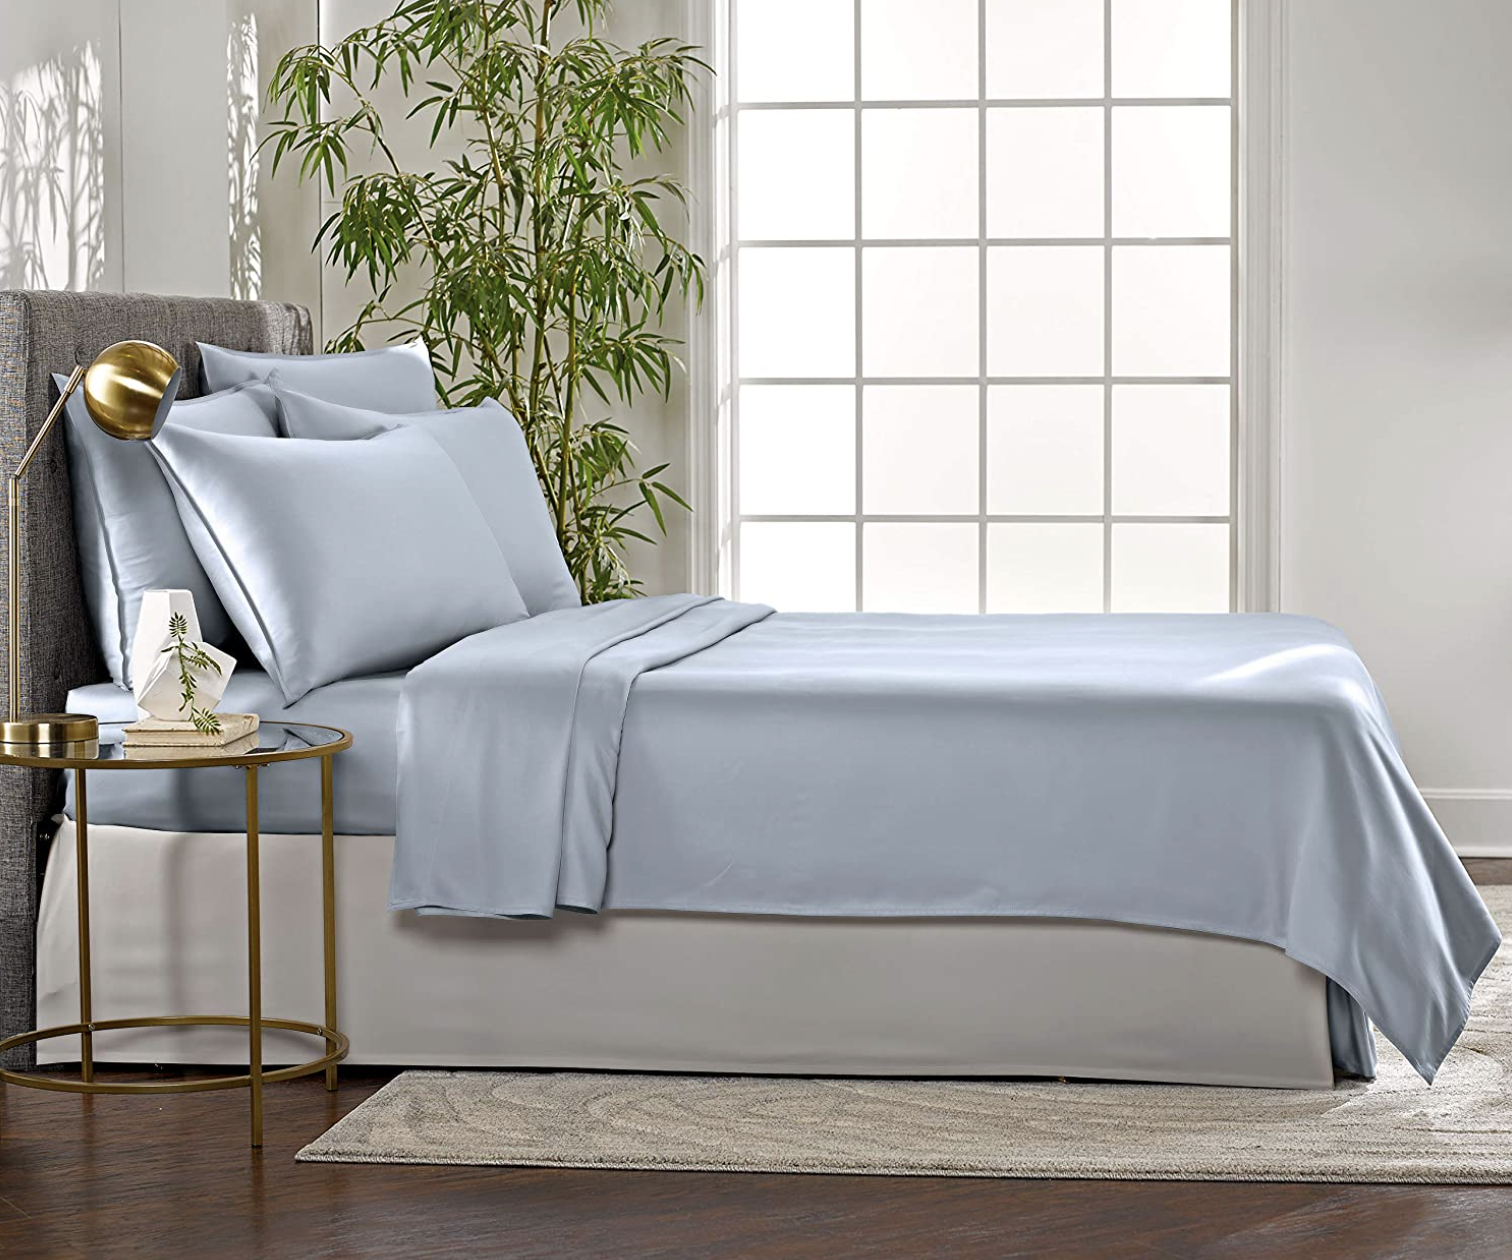 the sheets in light blue on a bed